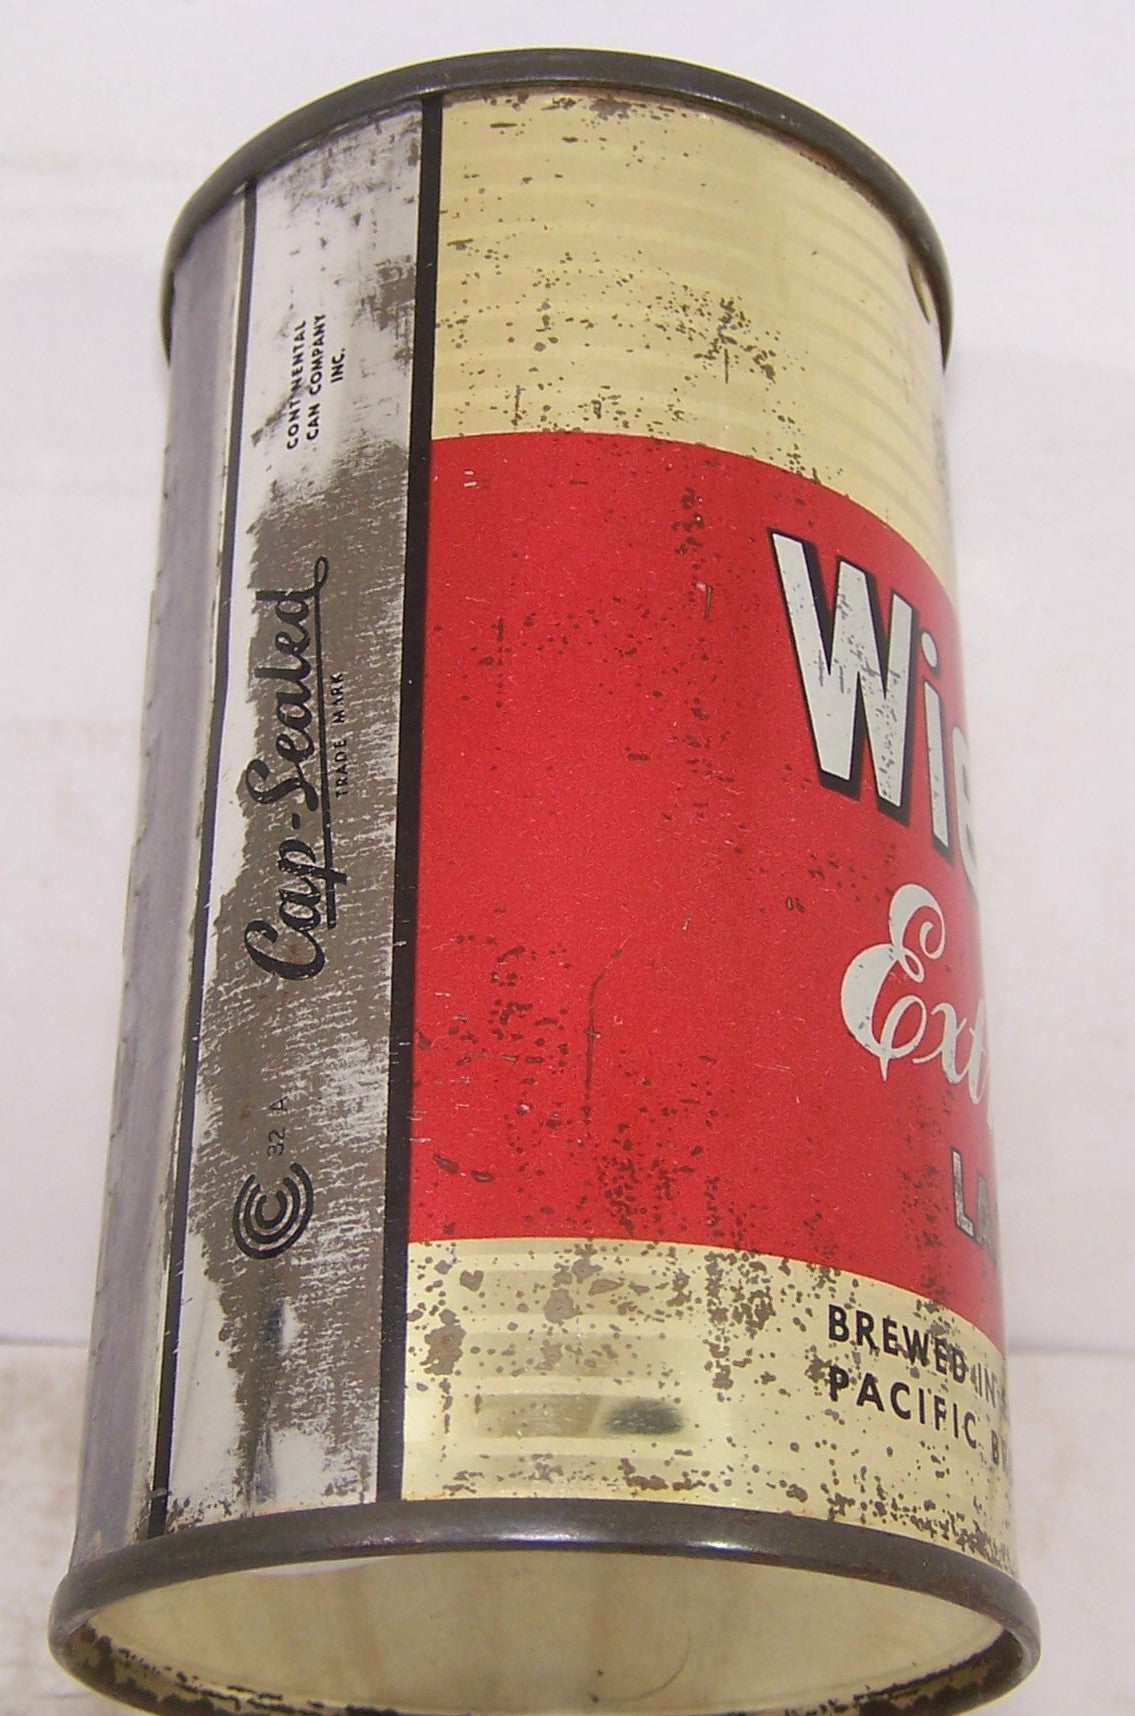 Weiland's Extra Pale Lager Beer, USBC 189-14, Grade 1- Sold 4/15/15